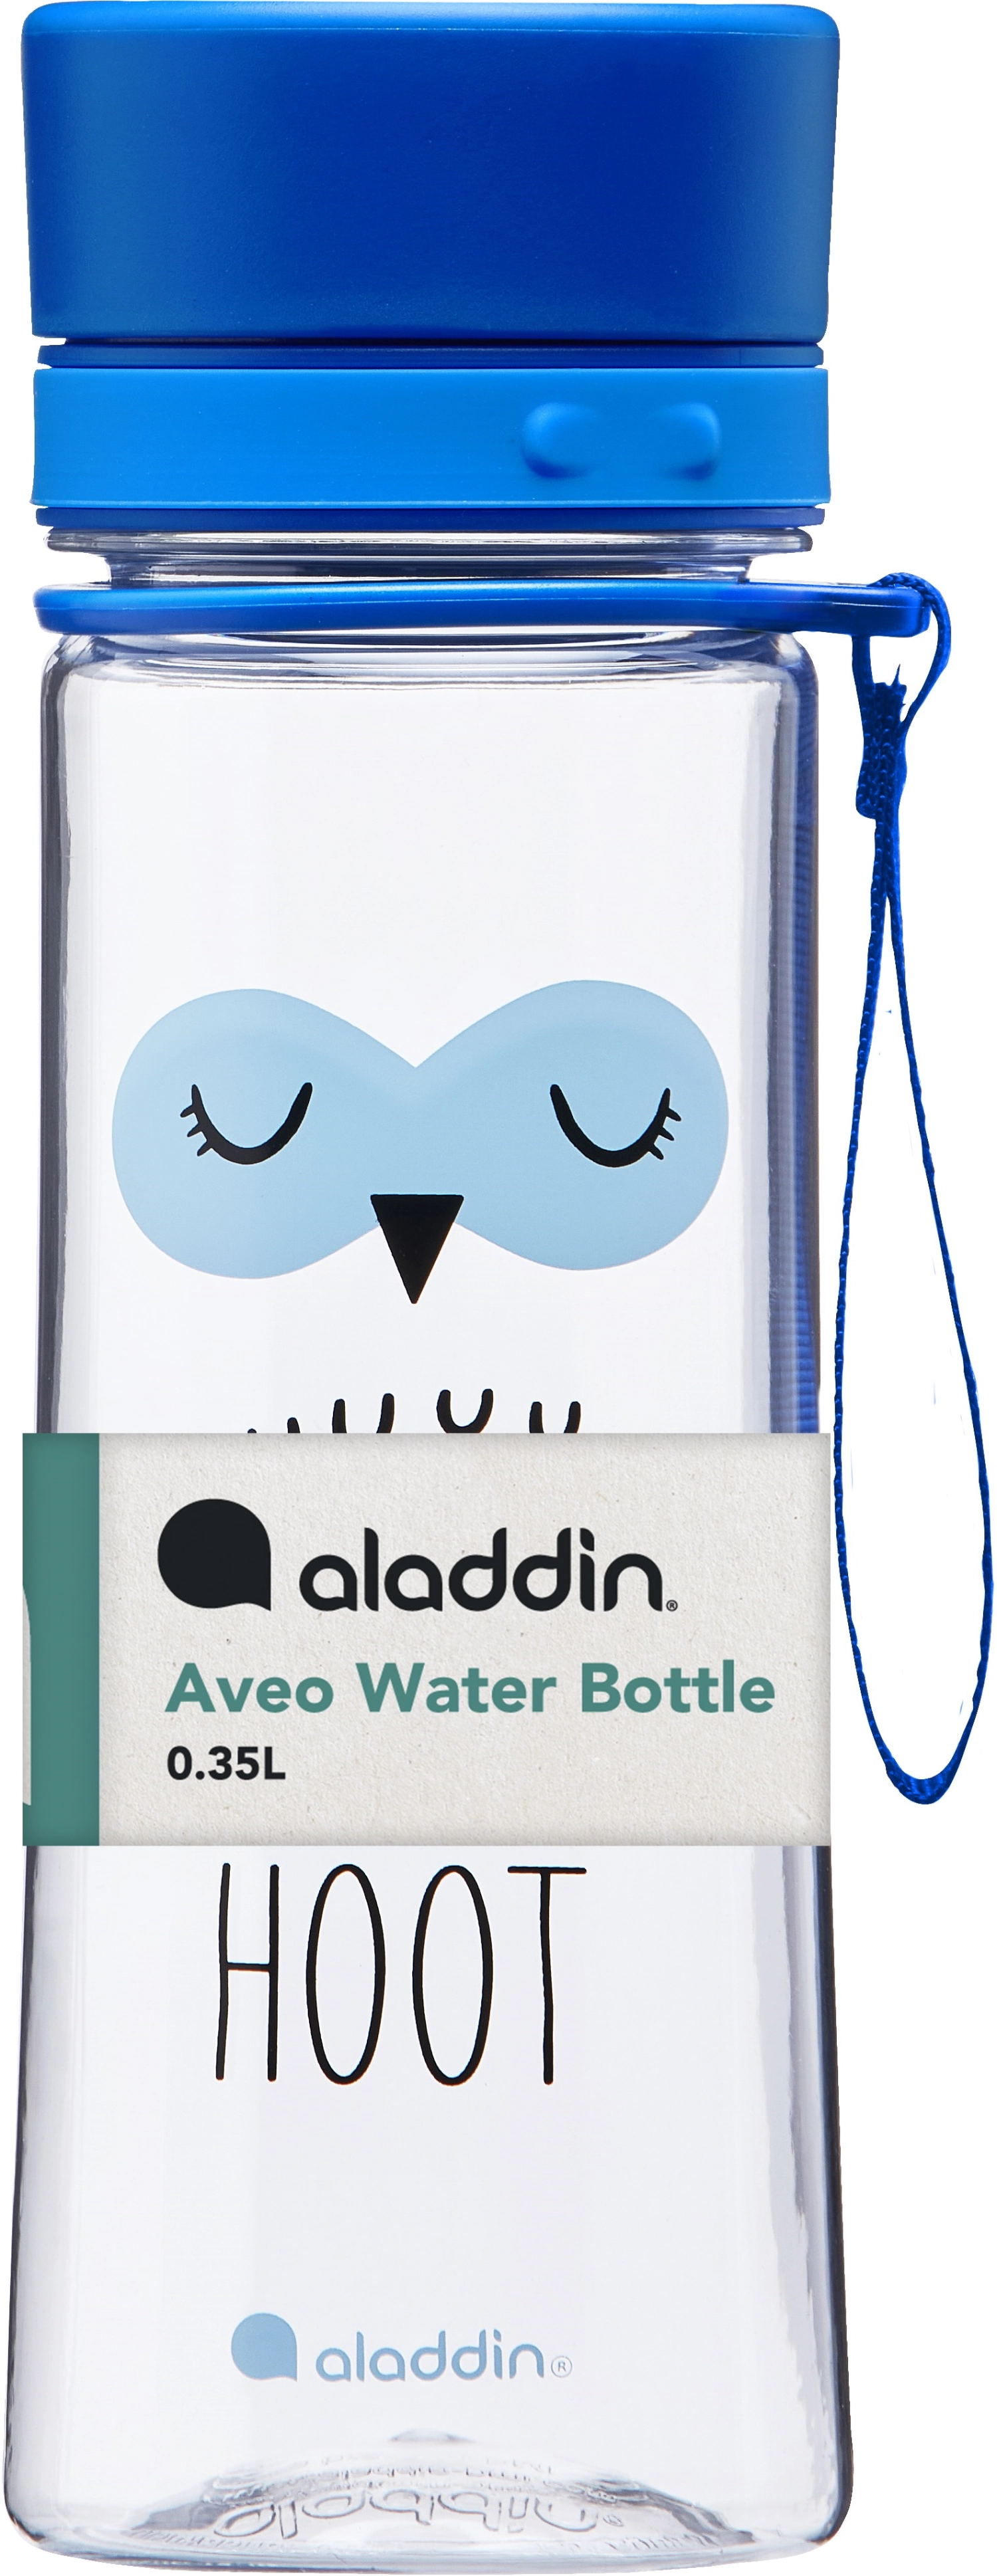 Aladdin my first aveo owl water bottle for kids 0.35l blue